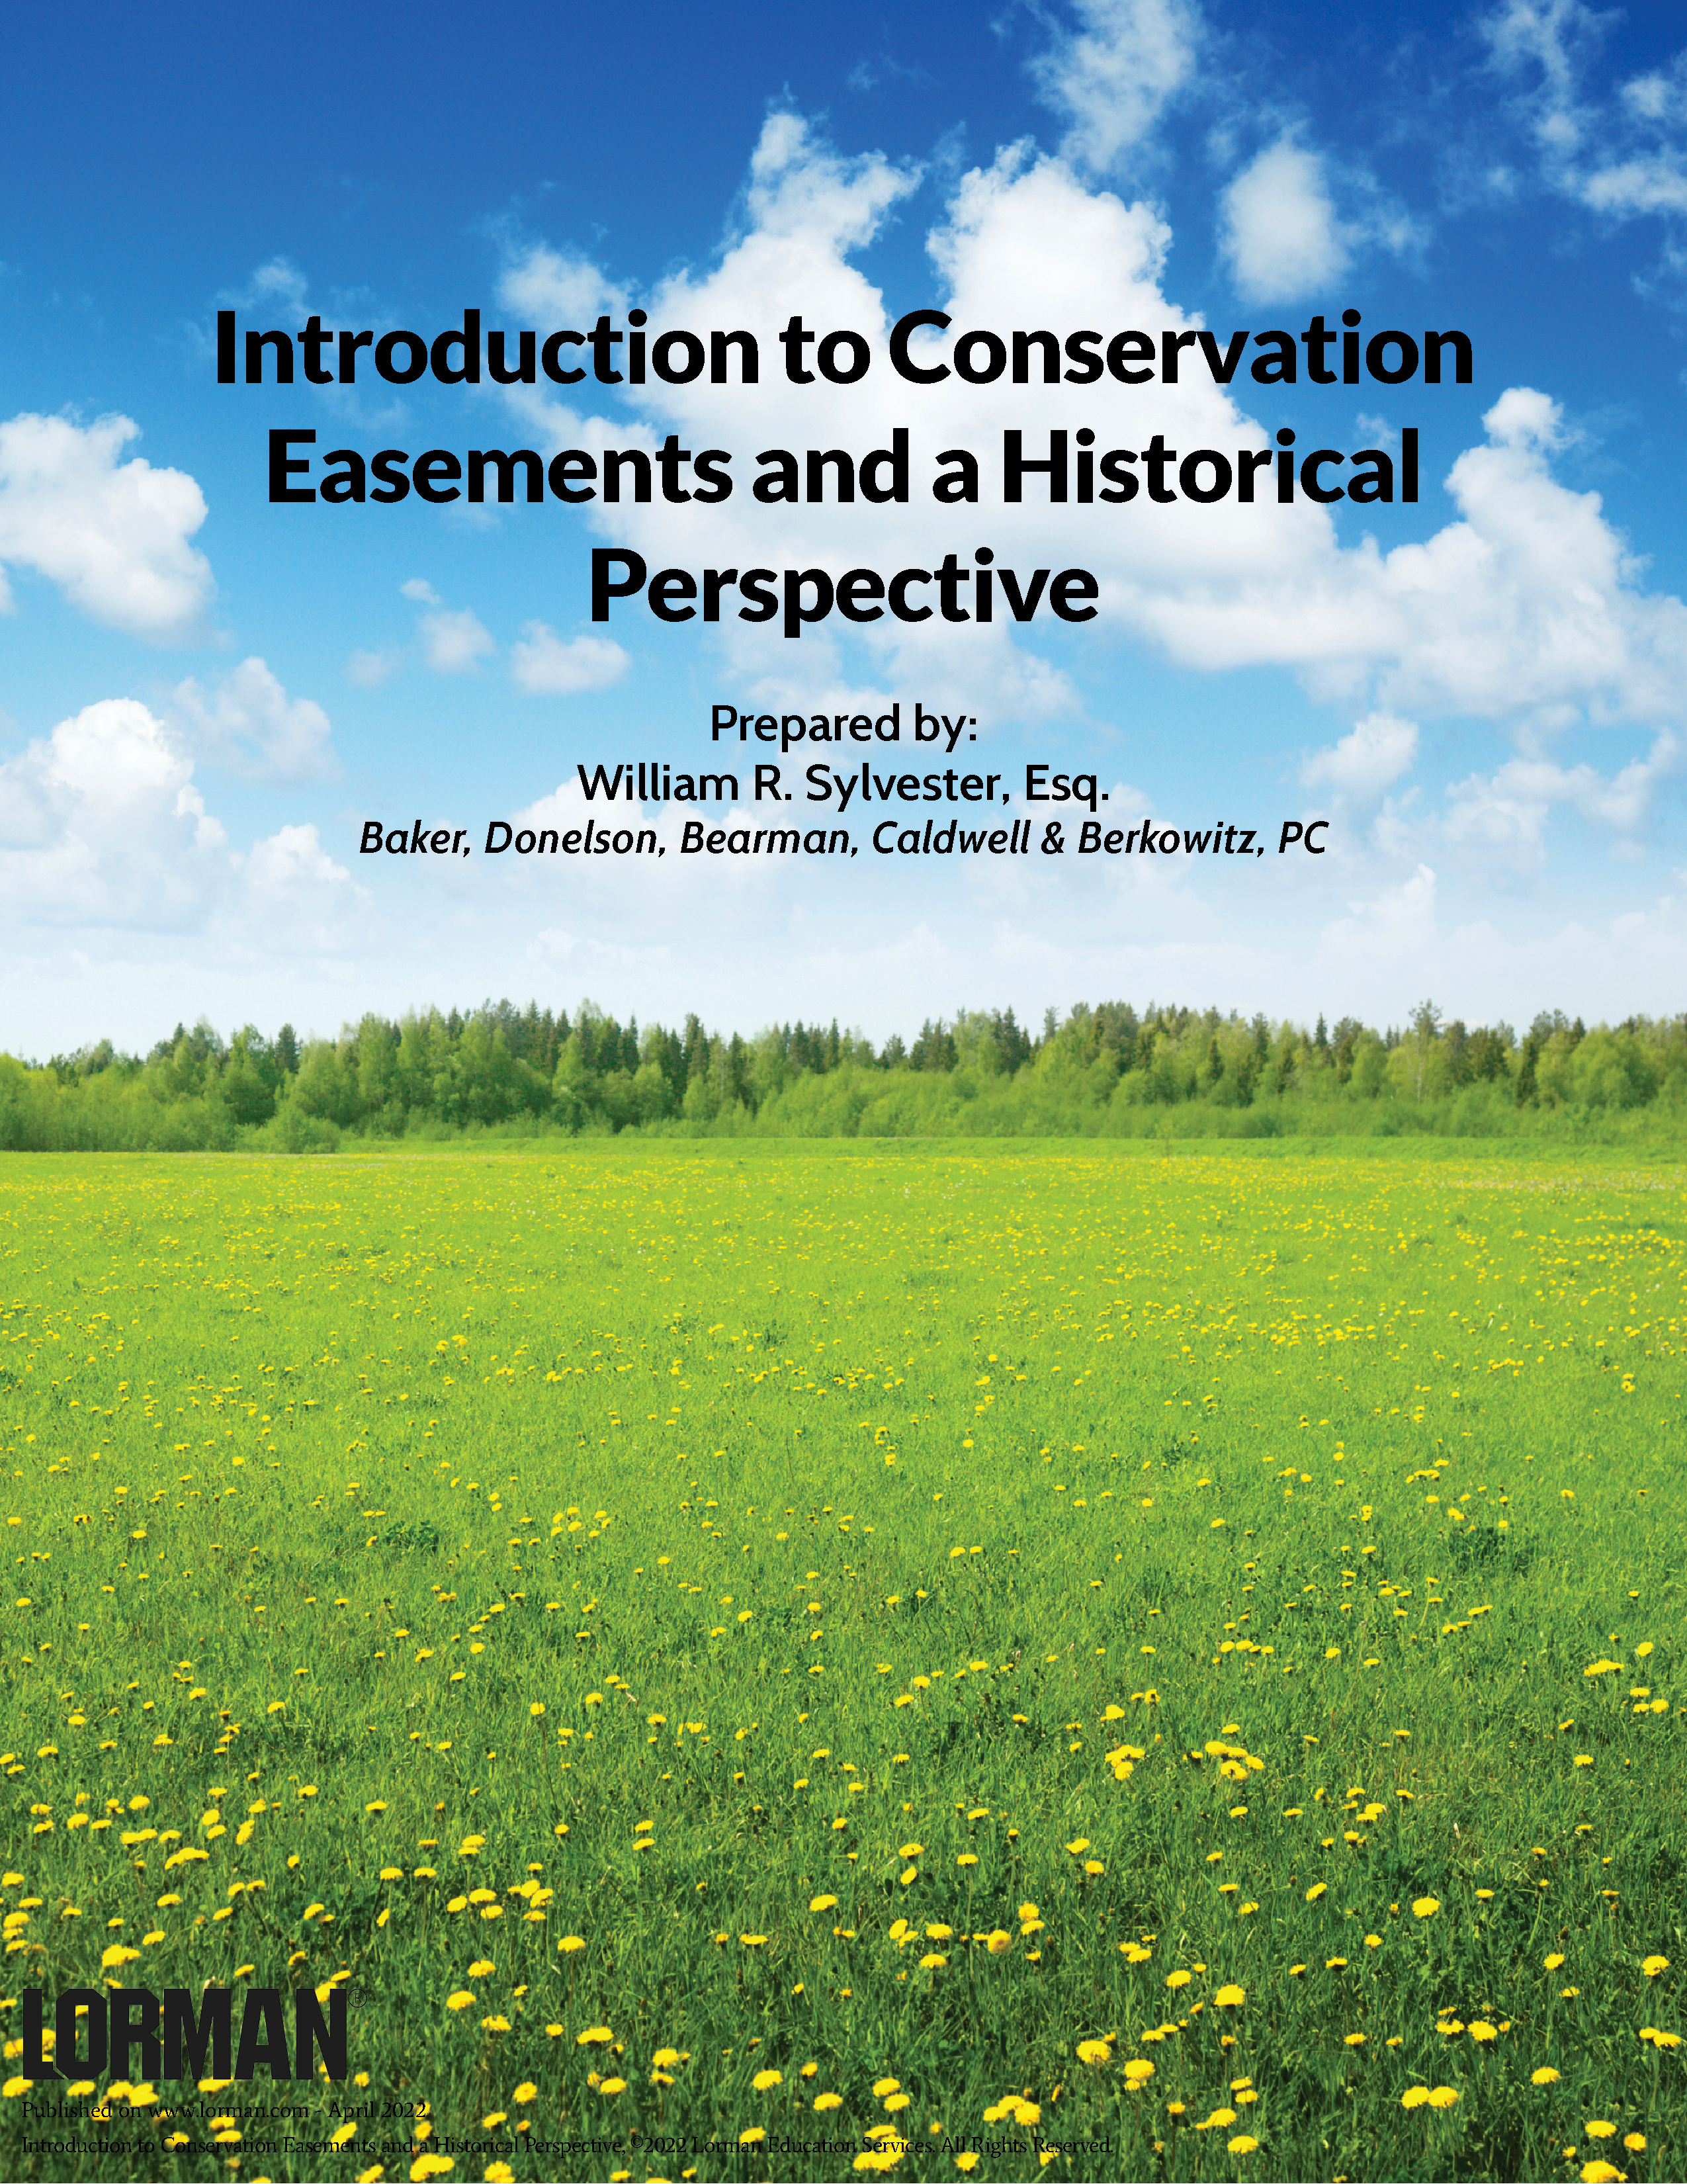 Introduction to Conservation Easements and a Historical Perspective